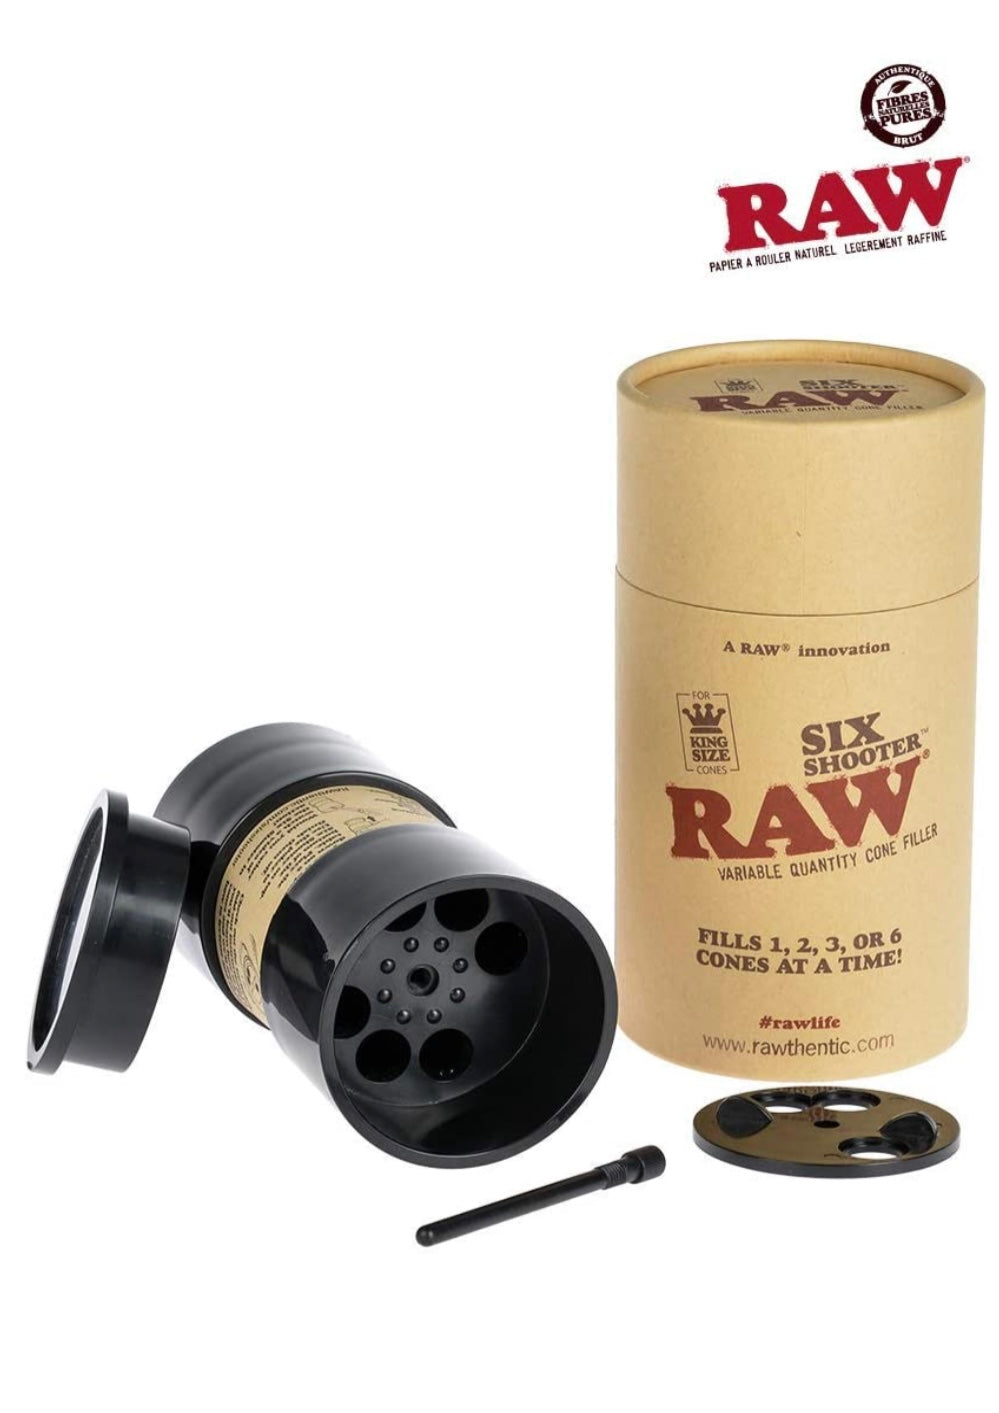 RAW Six Shooter Cone Filler yoga smokes yoga studio, delivery, delivery near me, yoga smokes smoke shop, find smoke shop, head shop near me, yoga studio, headshop, head shop, local smoke shop, psl, psl smoke shop, smoke shop, smokeshop, yoga, yoga studio, dispensary, local dispensary, smokeshop near me, port saint lucie, florida, port st lucie, lounge, life, highlife, love, stoned, highsociety. Yoga Smokes King Size